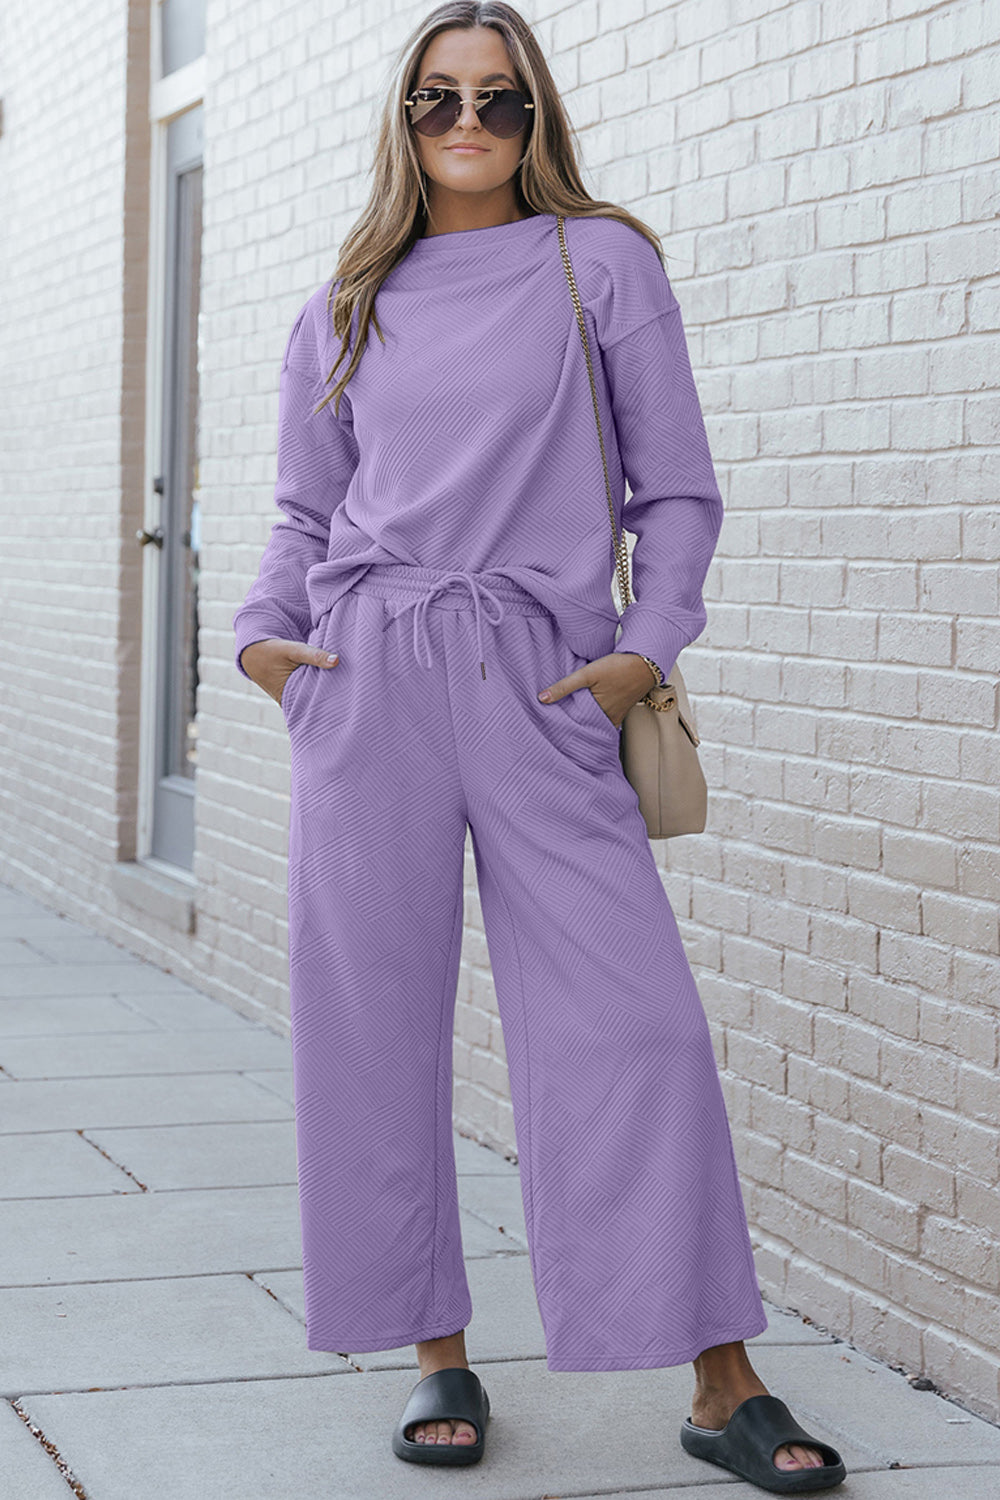 Double Take Full Size Textured Long Sleeve Top and Drawstring Pants Set Lavender XL 